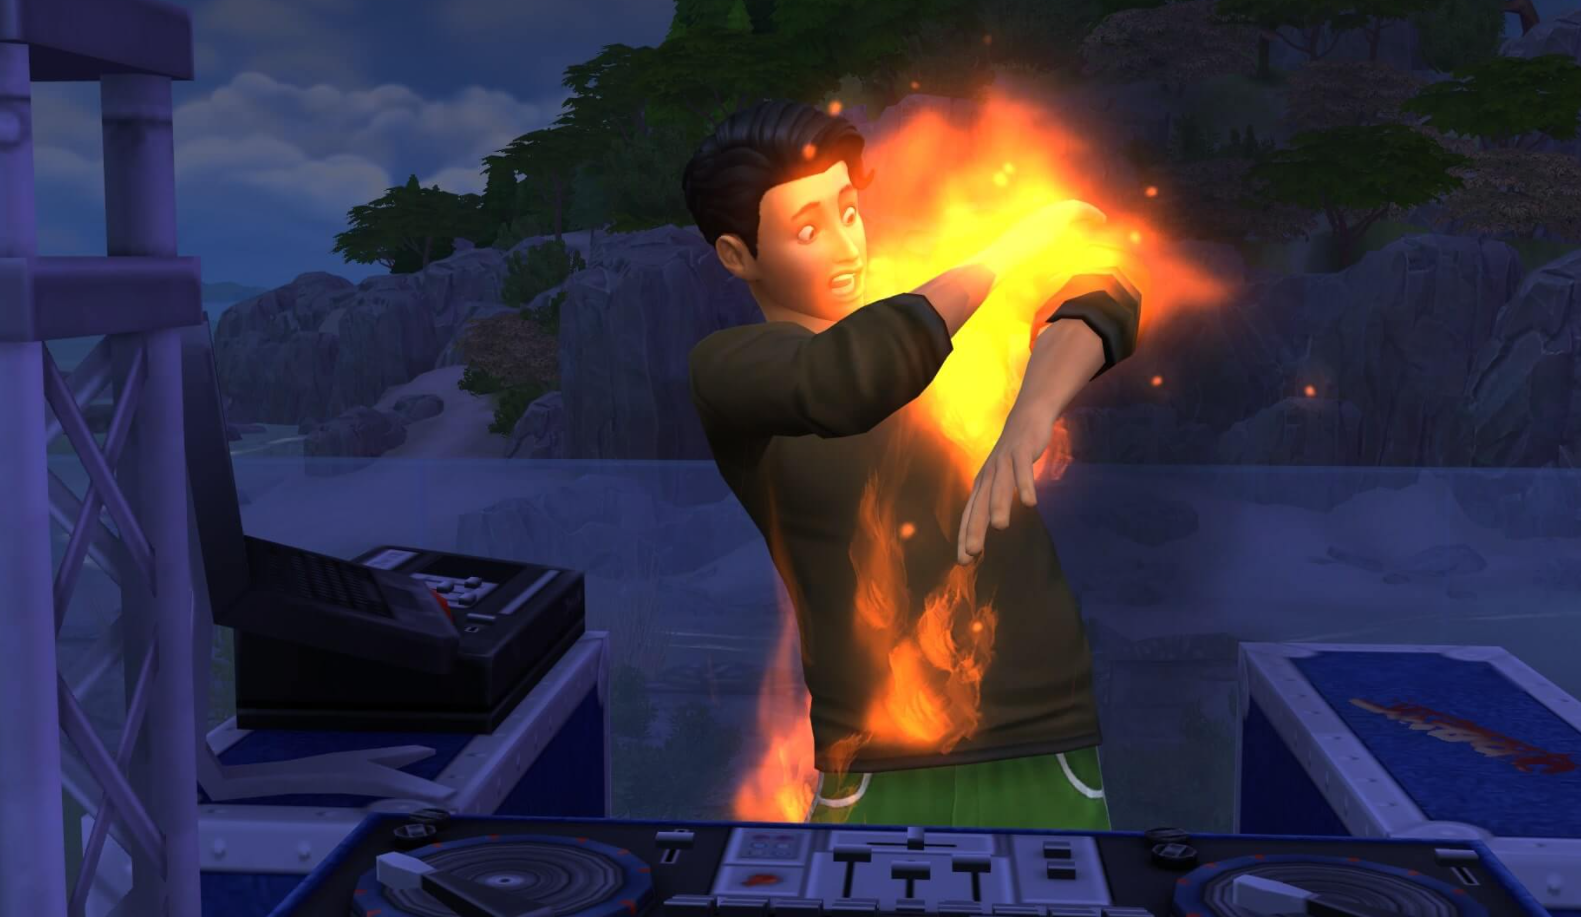 set your Sim on fire